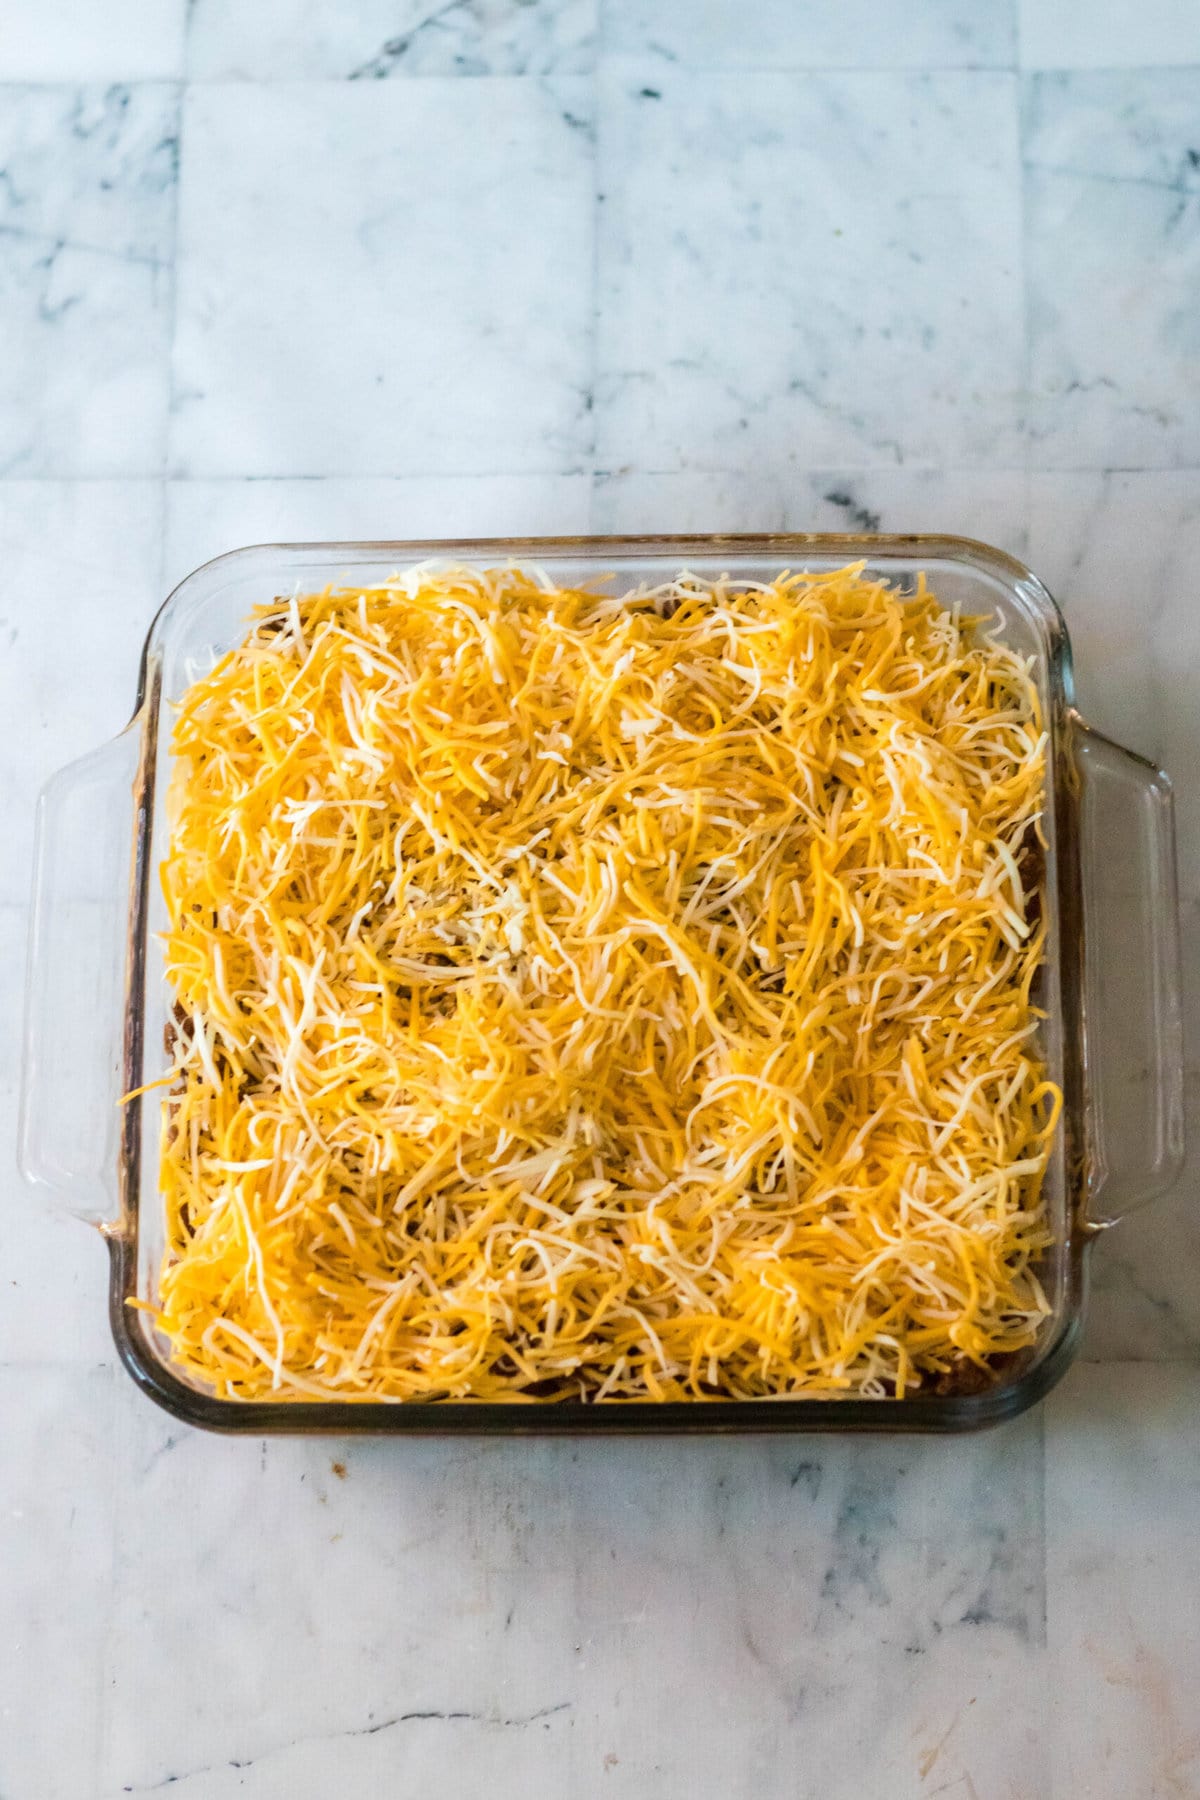 Adding a layer of shredded cheese.